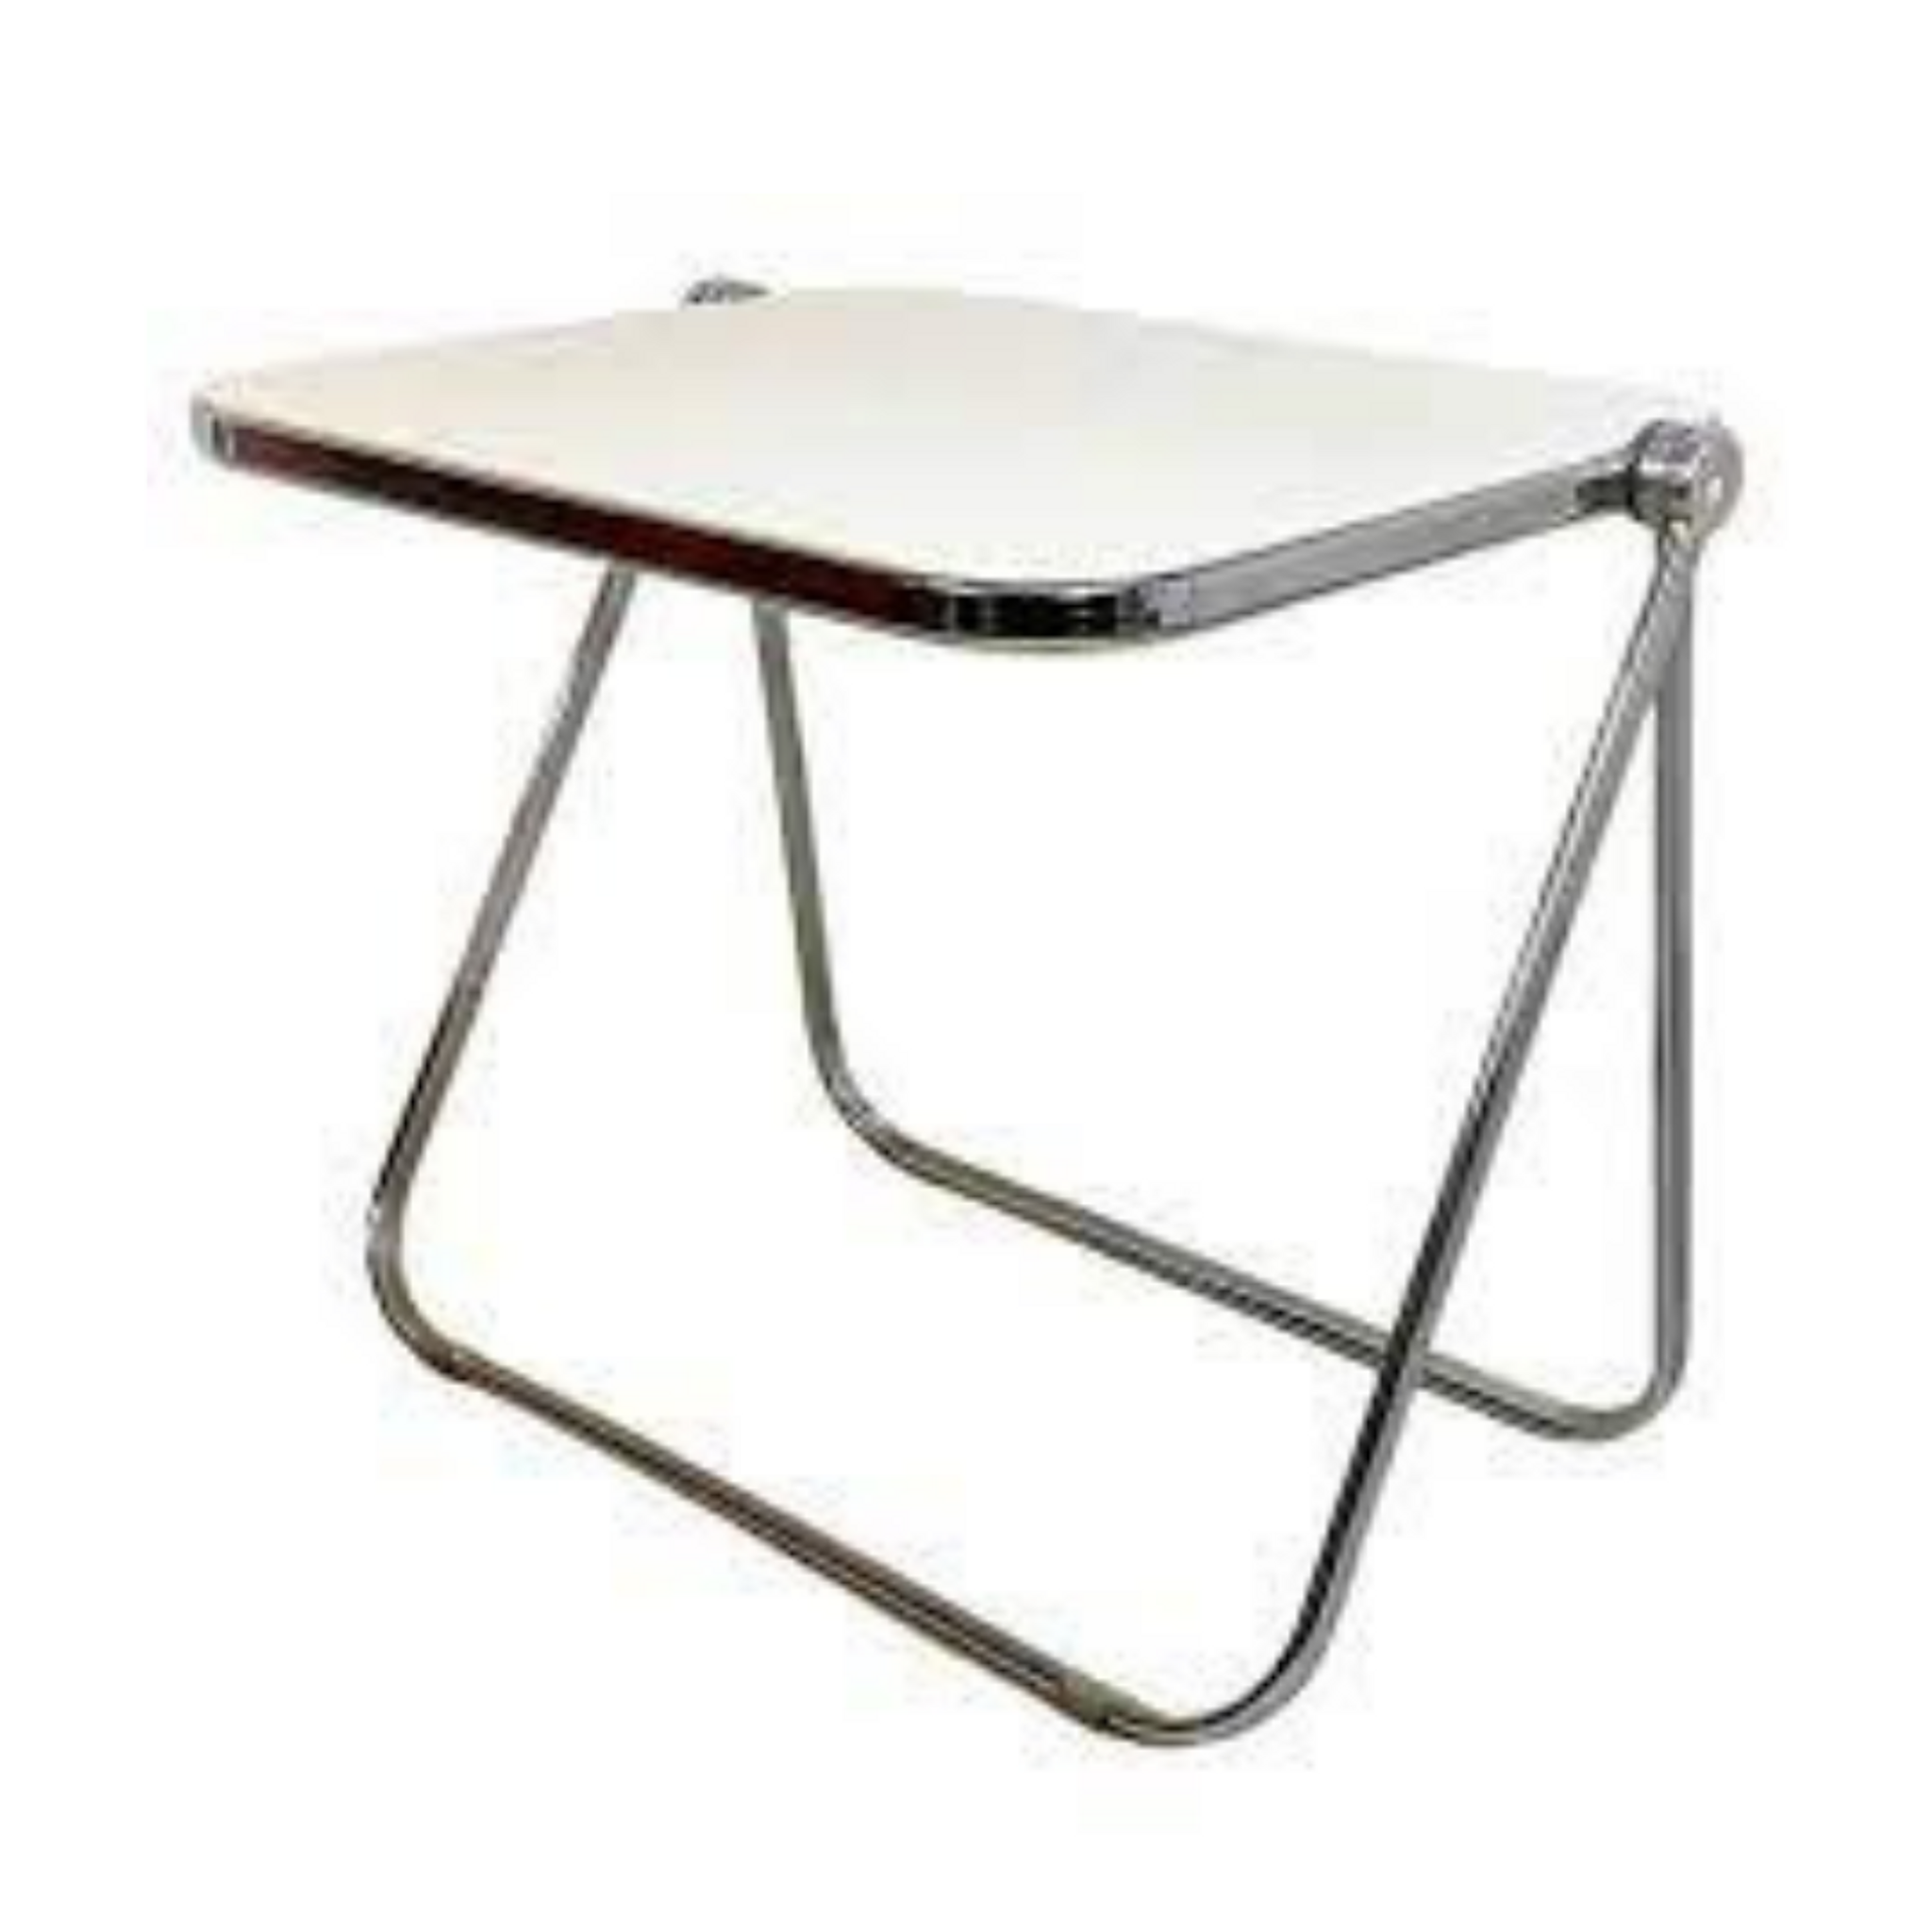 Acrylic Folding Chair with Chrome Trim and Matching Work Table